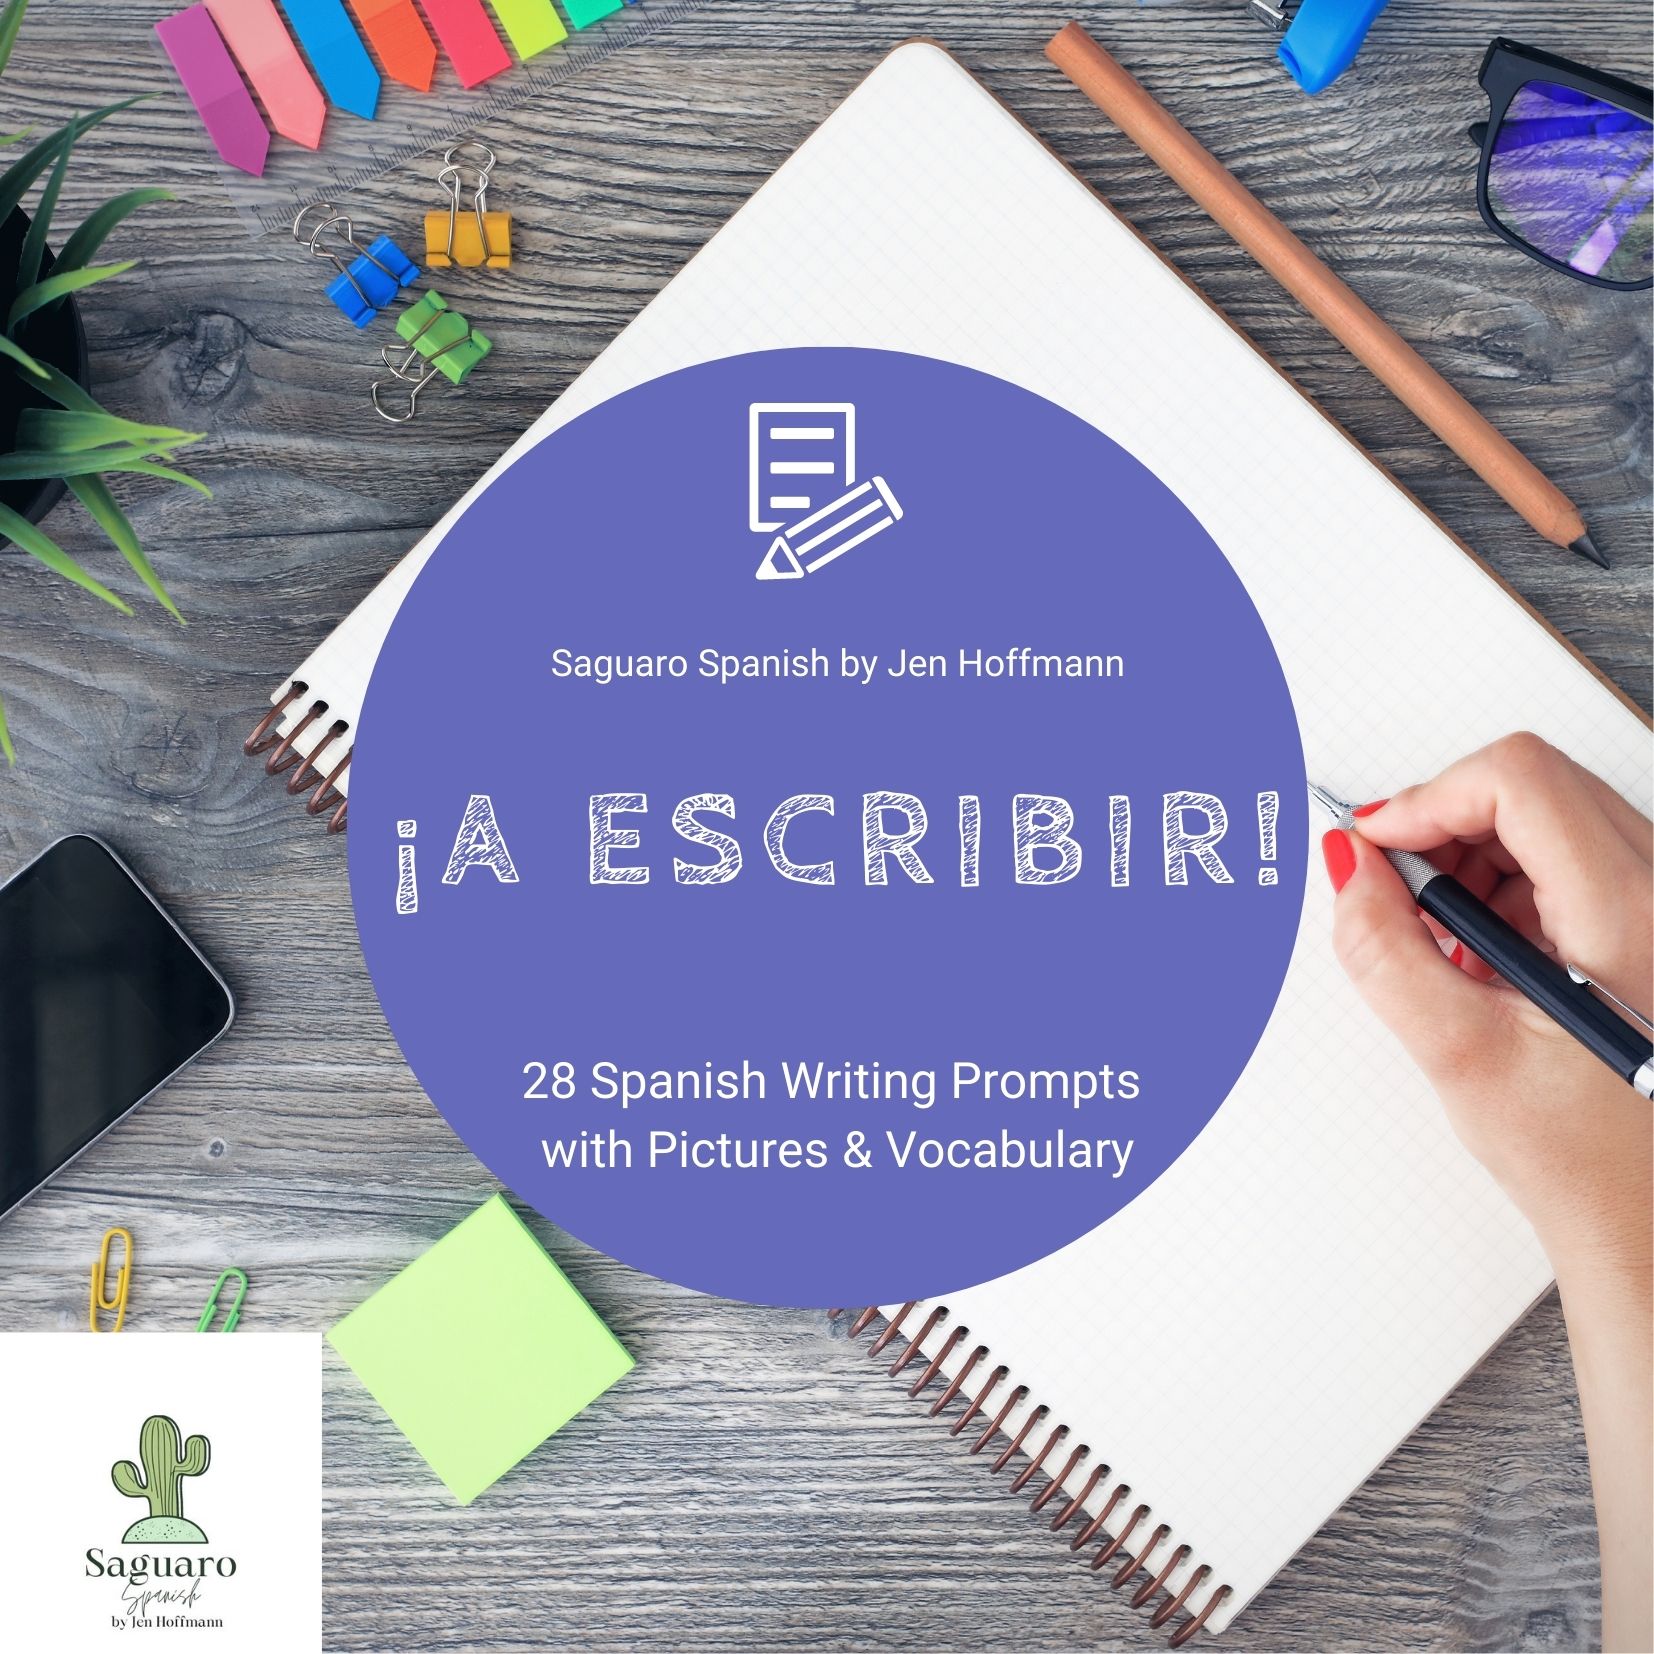 ¡A escribir!: Spanish Writing Prompts with Pictures and Vocabulary's featured image